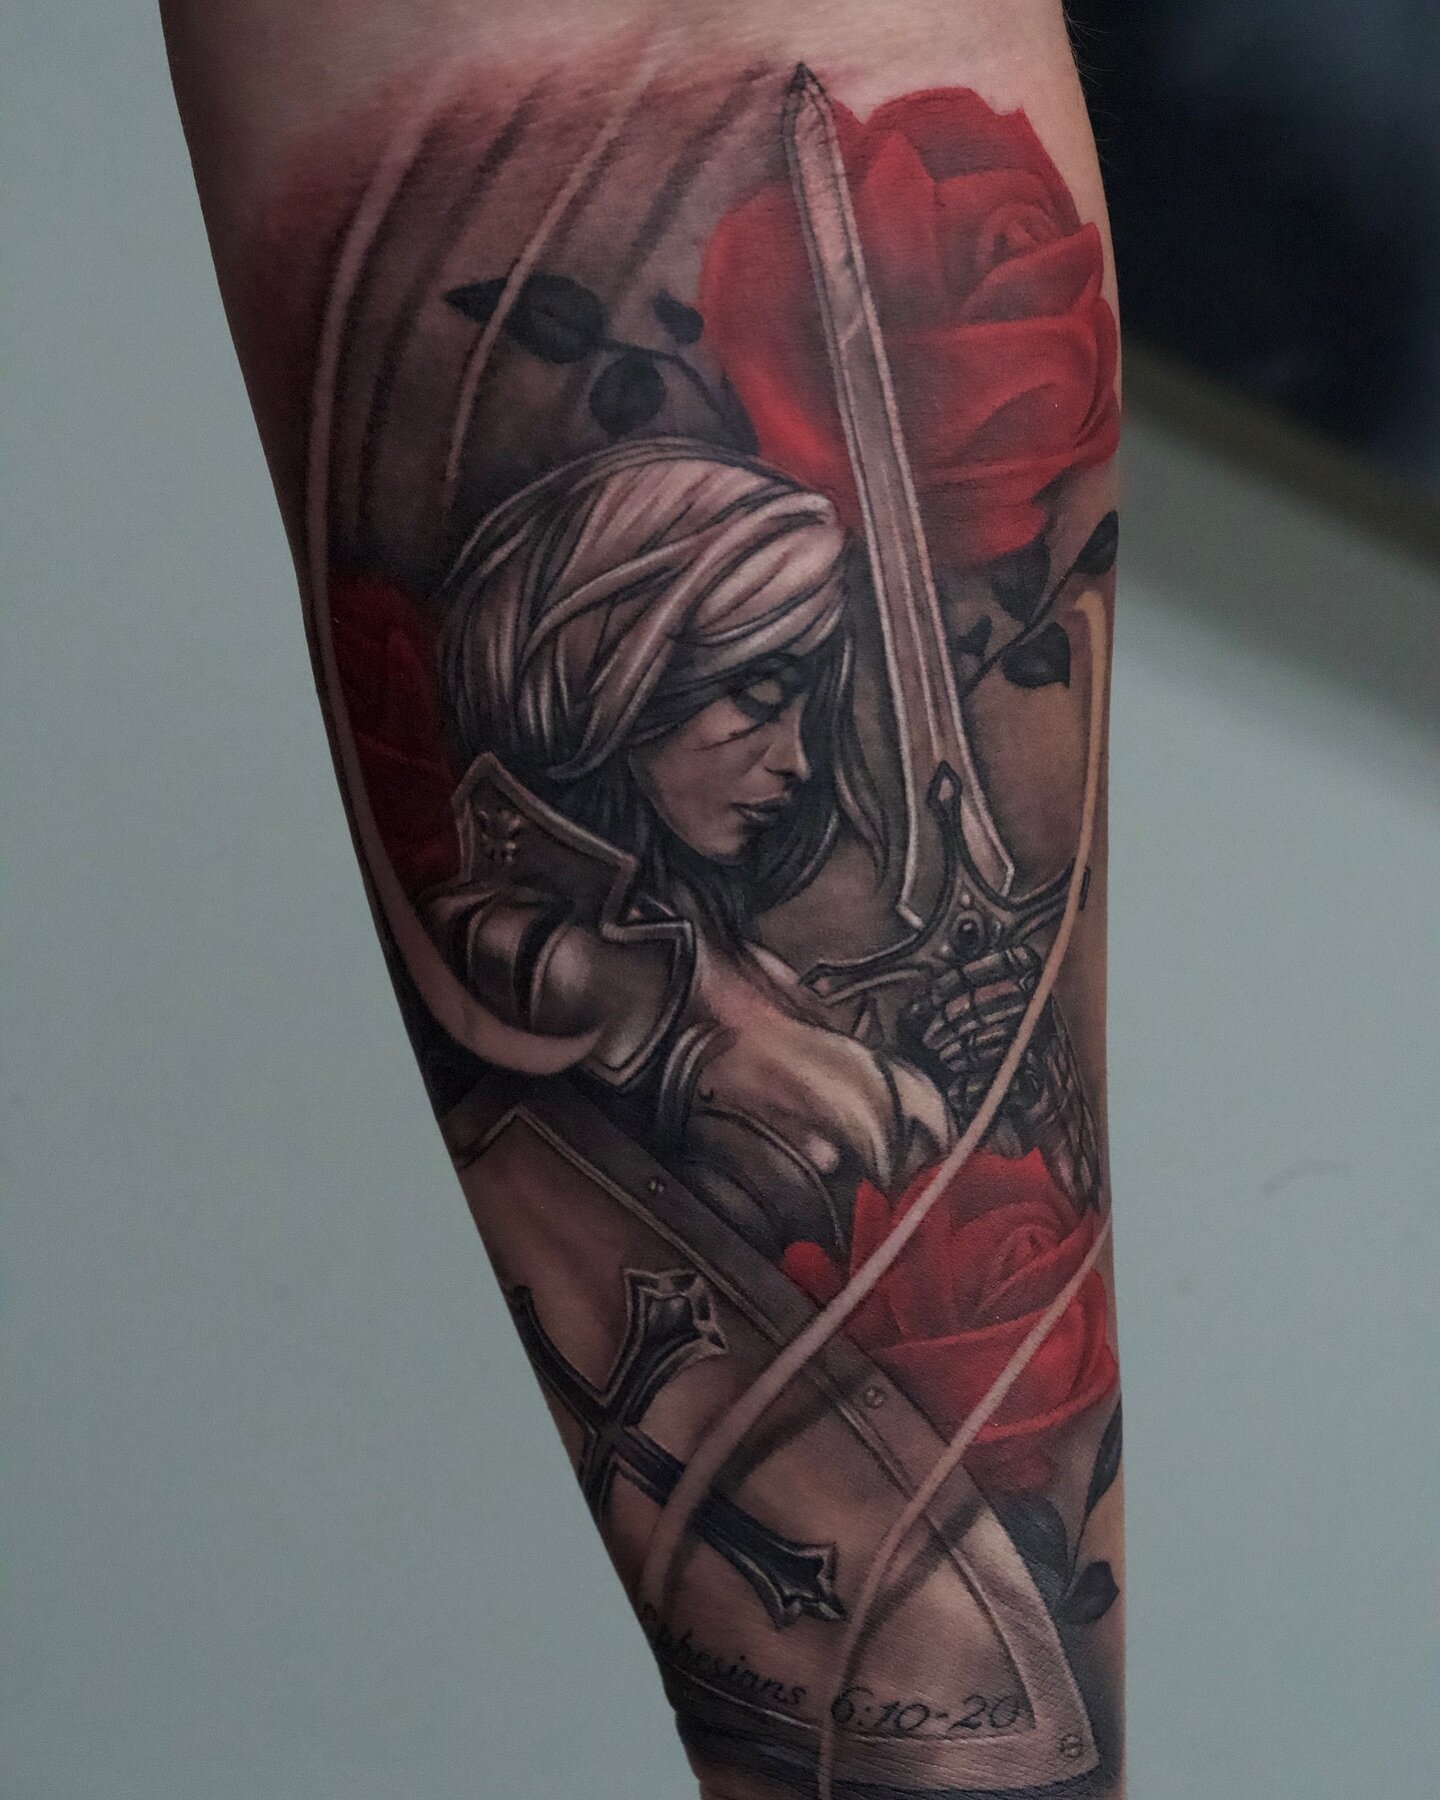 Female warrior🥀 Tattooed by @brandedredart 
Such a well done piece!
He&rsquo;s booking April currently; schedule now just in time to use that tax refund money on your next dream sleeve 😉 #femalewarrior #femalewarriors #femalewarriortattoo #sleeveta